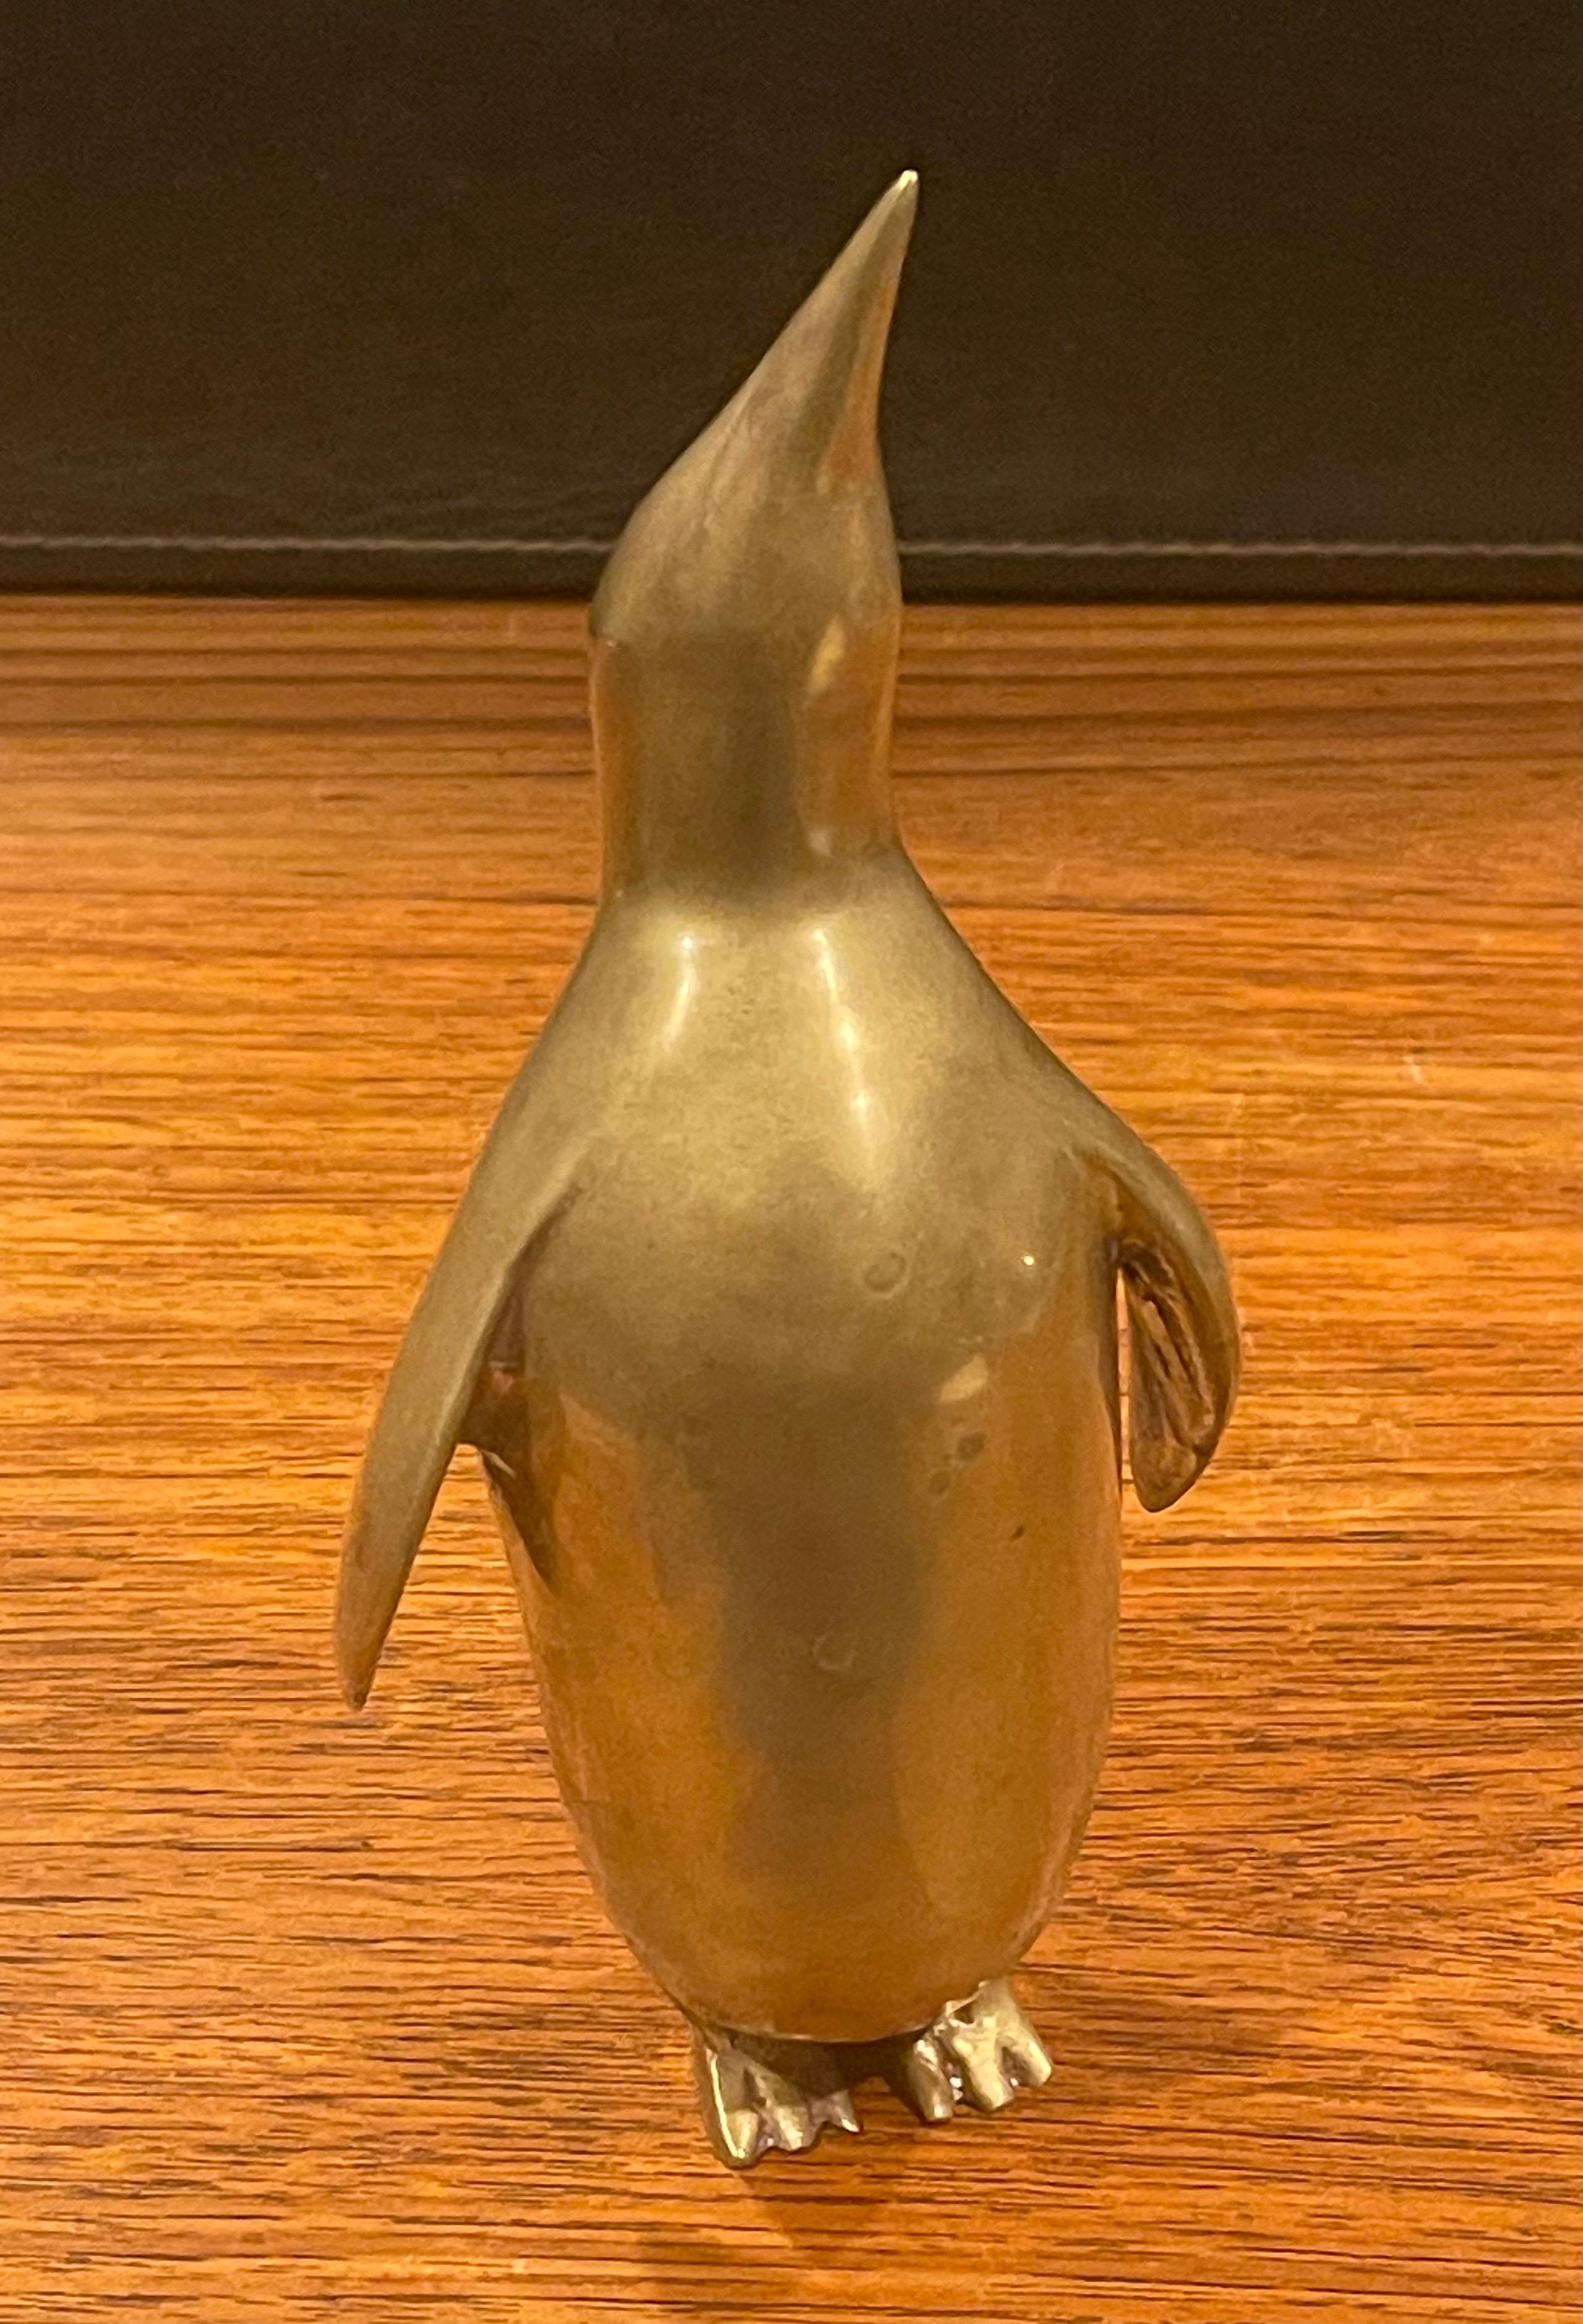 A very cool modernist brass penguin sculpture with a gorgeous natural patina, circa 1970s. The piece is in very good vintage condition and measures 3.5